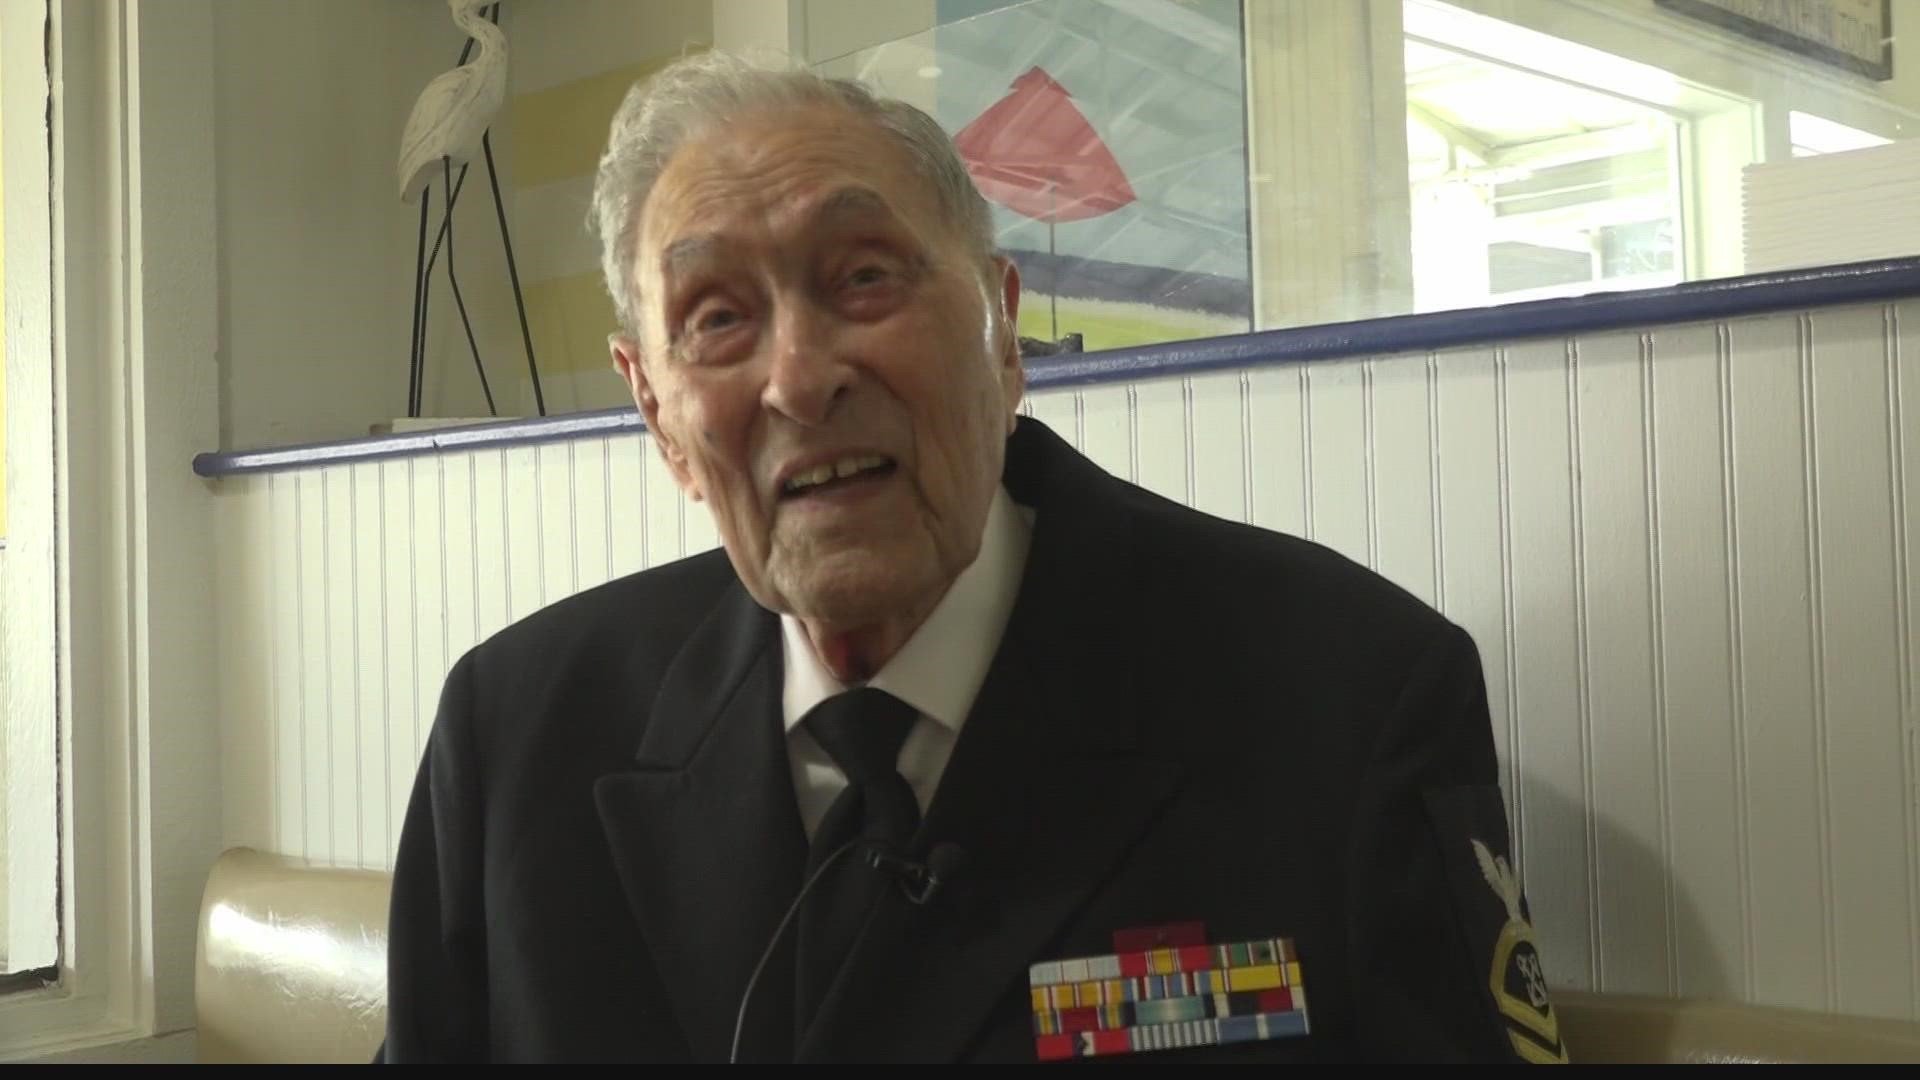 Chief Robert Johnson (Ret.) turned 102 this week. He was honored at a celebration at Beach Diner in Atlantic Beach.